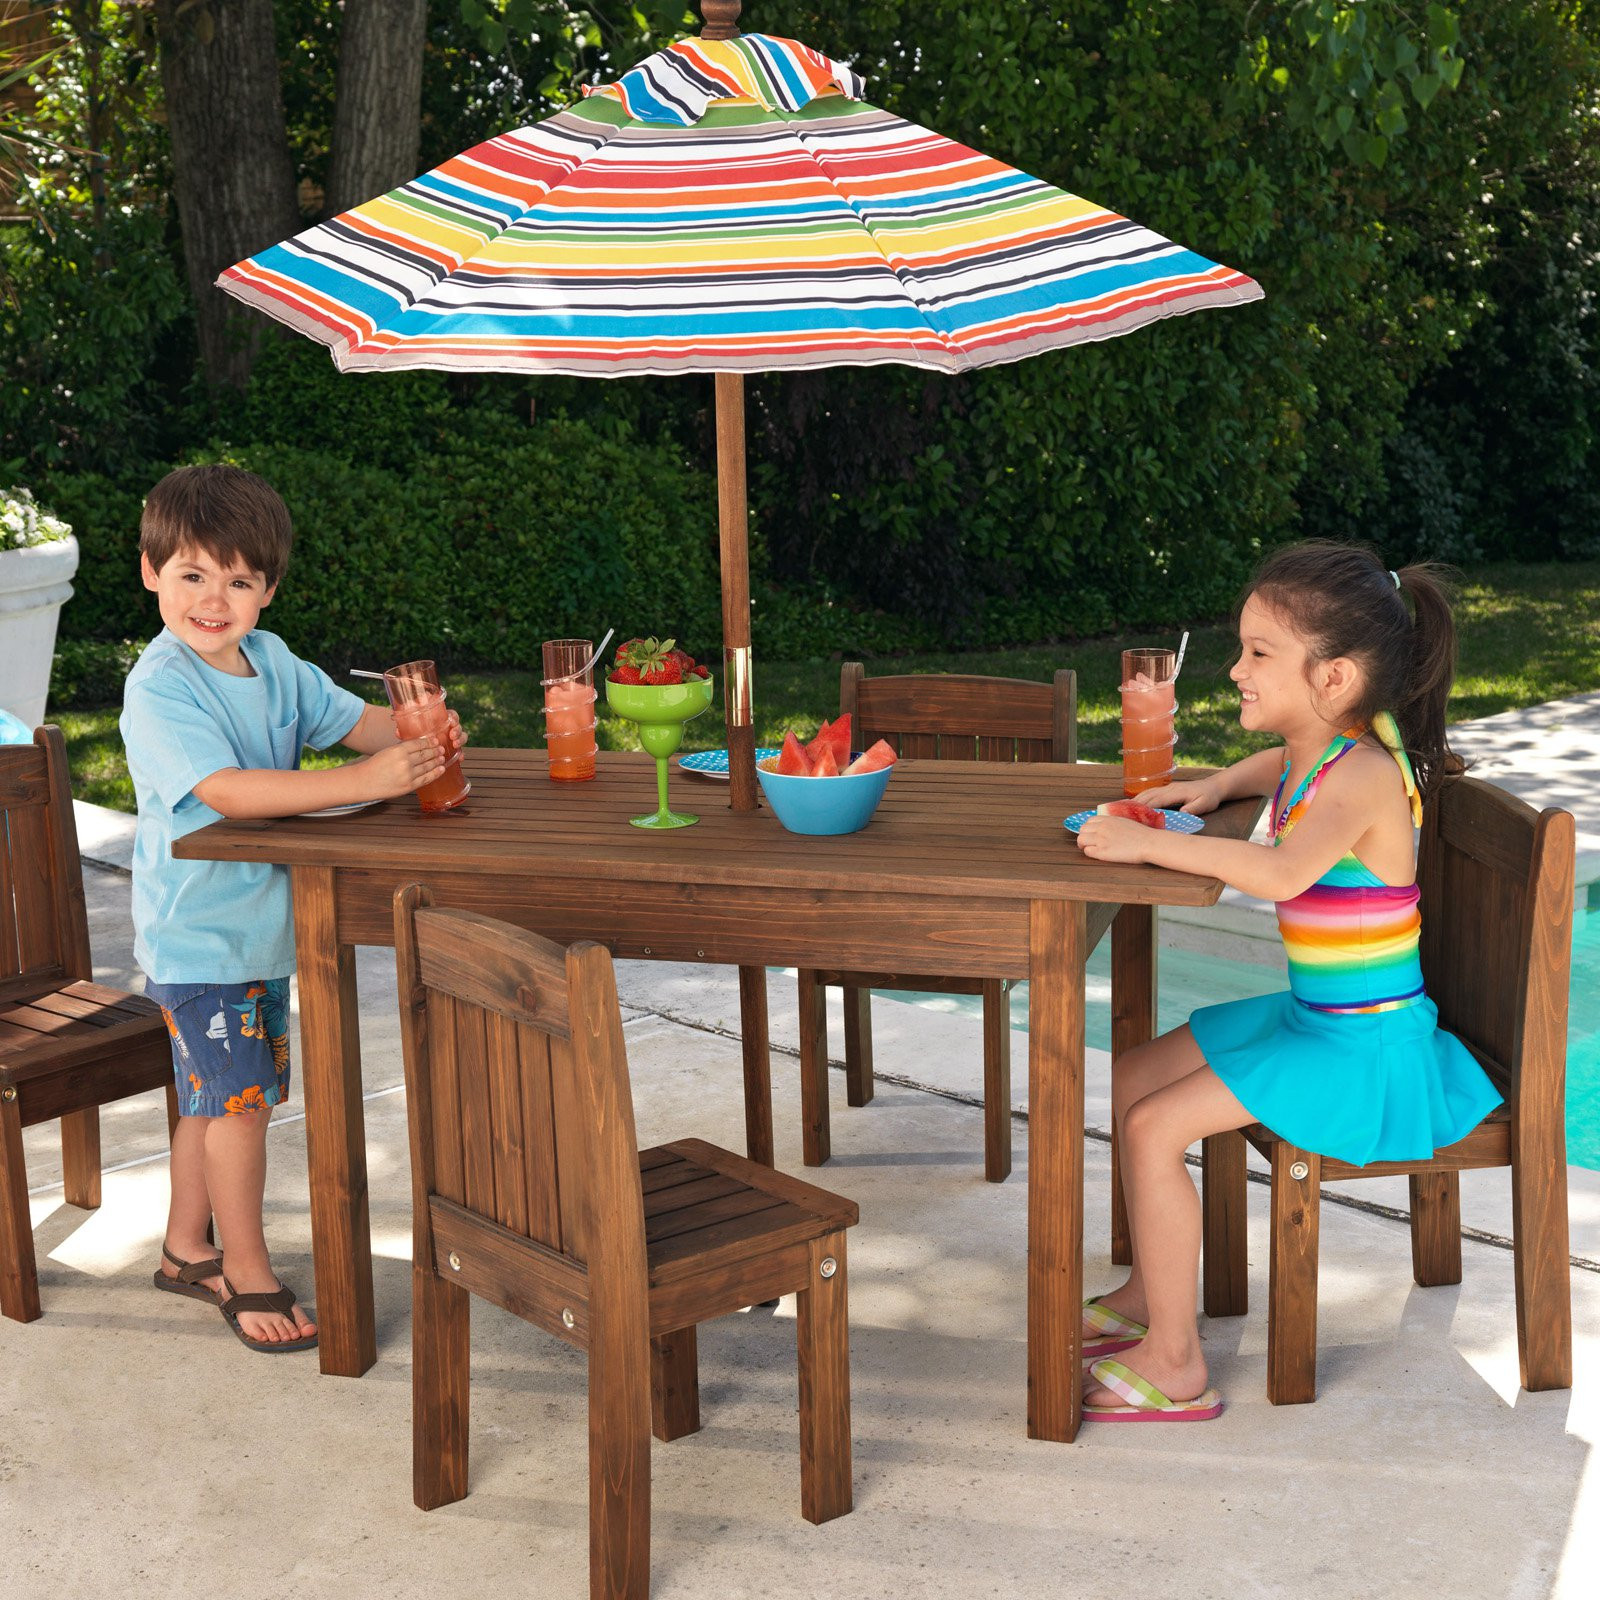 Kids Garden Chair
 KidKraft Outdoor Table and 4 Stacking Chairs with Striped